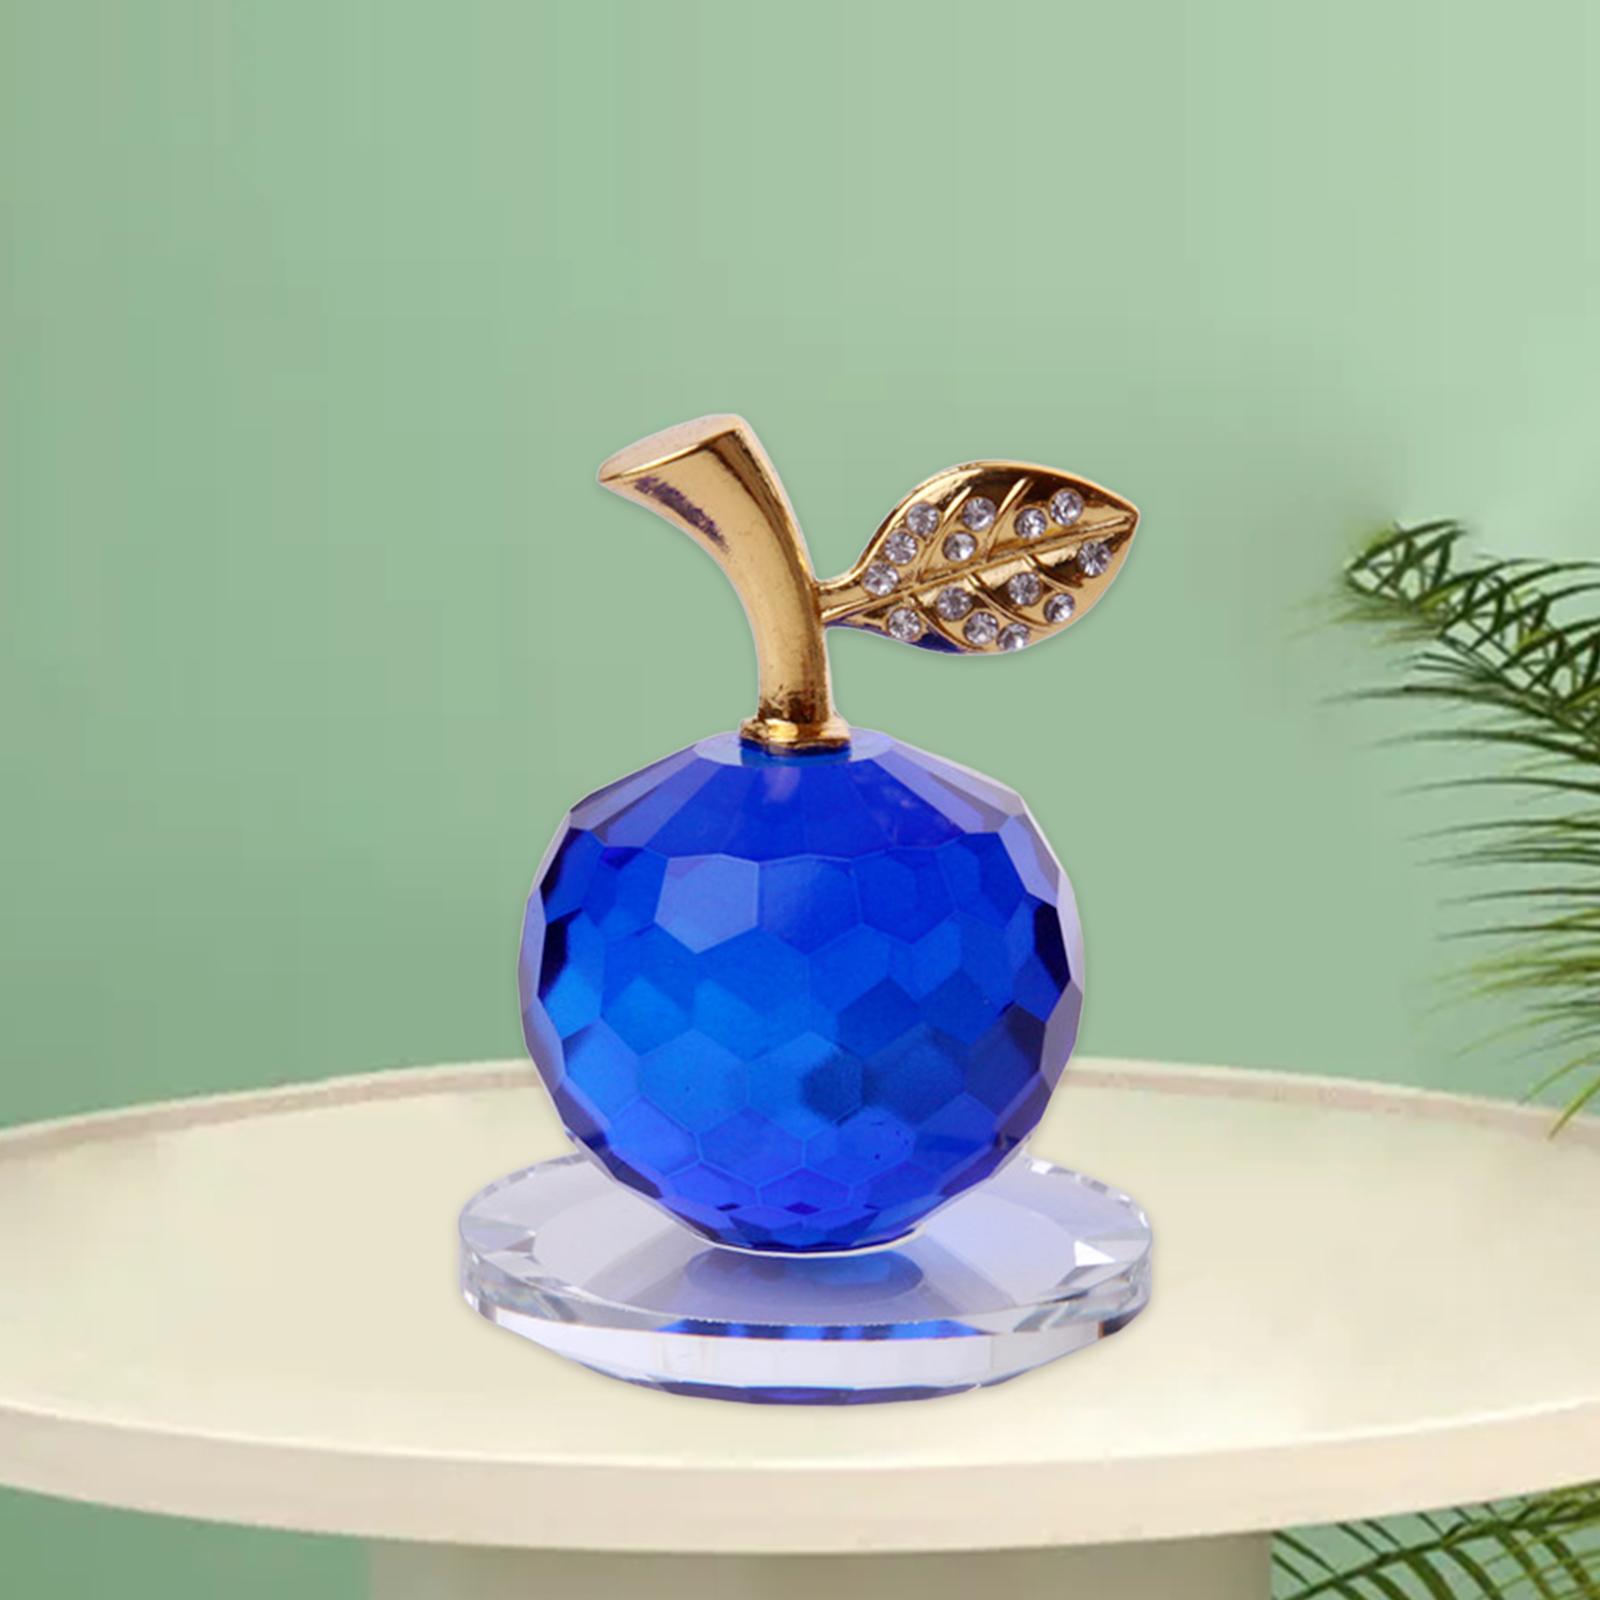 Crystal Apple Figurine Paperweight Ornament Home Decor Collectibles Gift Blue